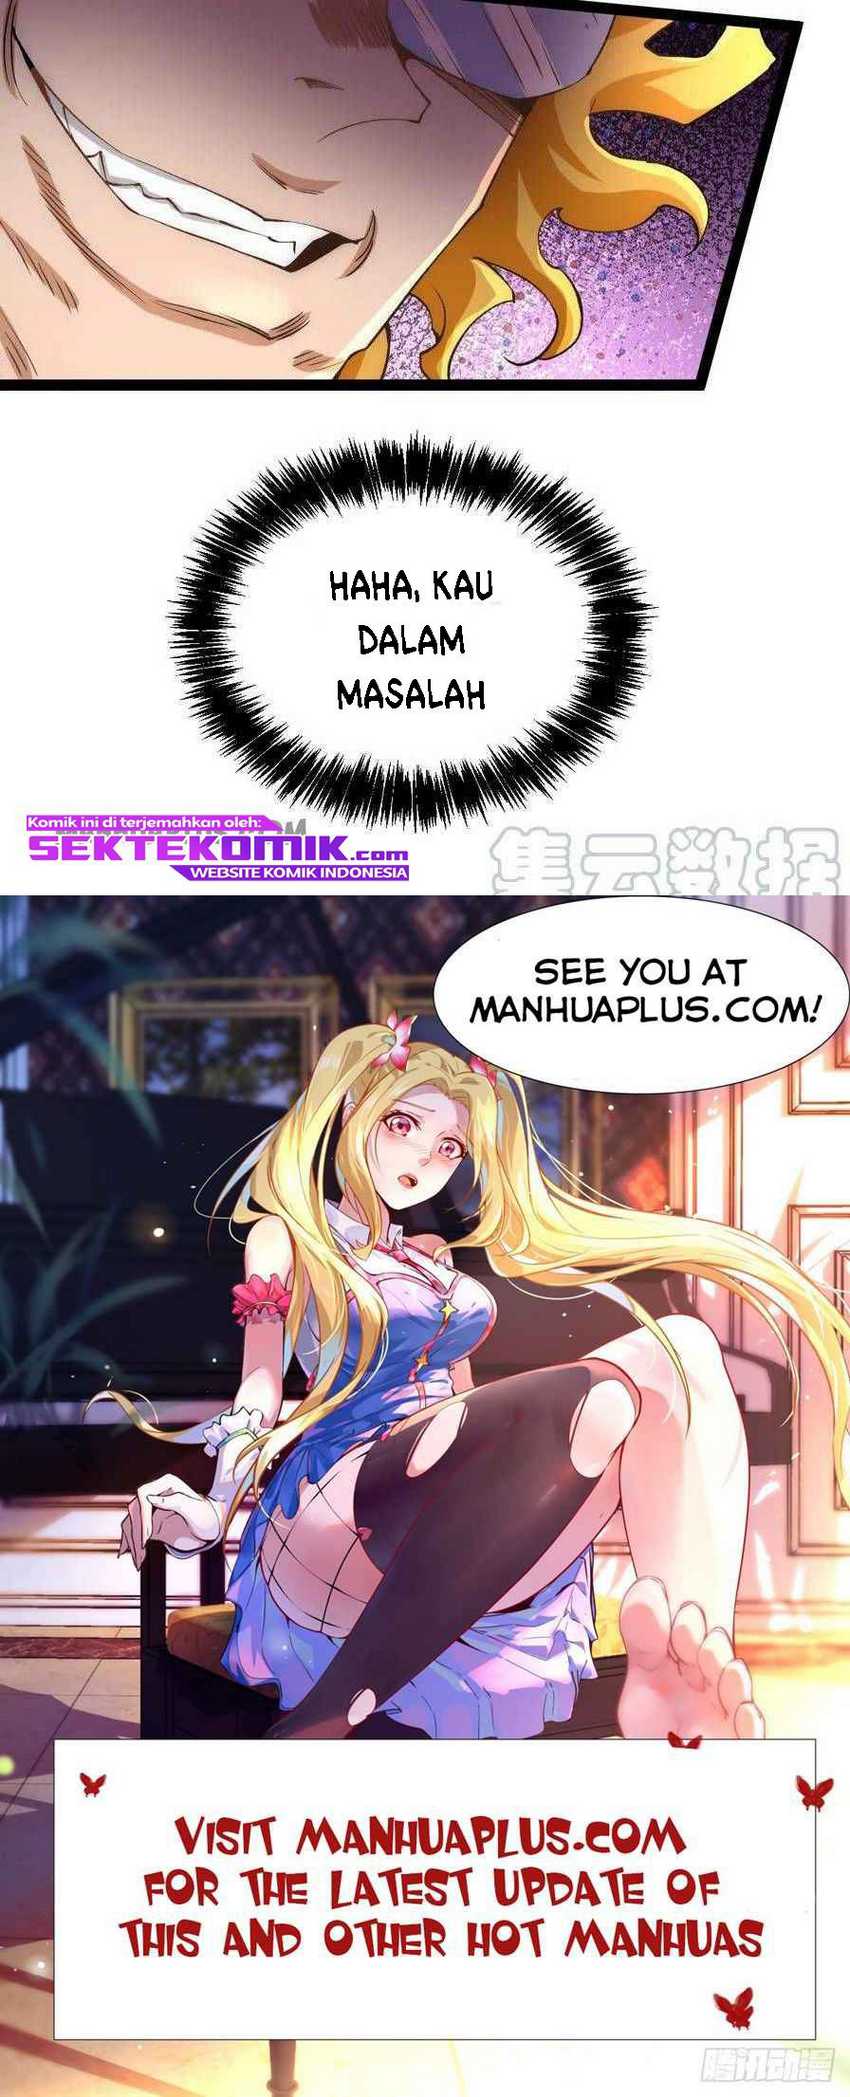 Almighty Master Chapter 129